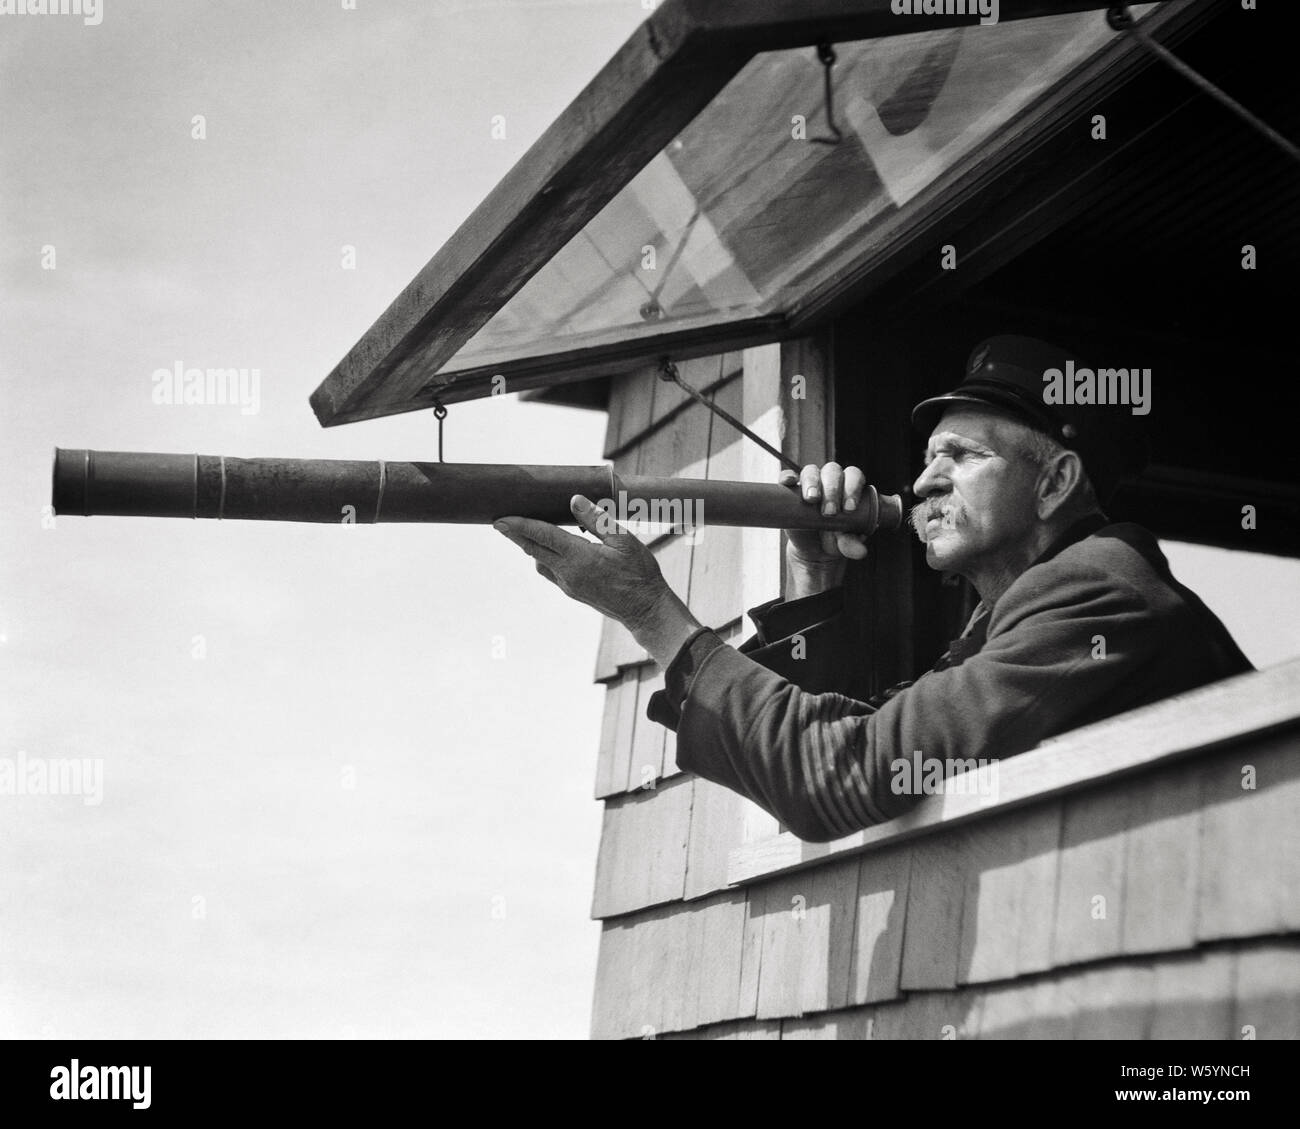 1910s 1920s MEMBER OF UNITED STATES COAST GUARD WITH TELESCOPE WATCHING FOR PEOPLE AND SHIPS IN DANGER IN OCEAN WATER OFF NJ USA - c83 HAR001 HARS COPY SPACE HALF-LENGTH PERSONS INSPIRATION UNITED STATES OF AMERICA CARING DANGER MALES RISK SHIPS SENIOR MAN SENIOR ADULT MIDDLE-AGED B&W LAW ENFORCEMENT NORTH AMERICA MIDDLE-AGED MAN NORTH AMERICAN MUSTACHE VISION PROTECTING DISCOVERY PROTECTION STRENGTH MUSTACHES AND KNOWLEDGE PRIDE IN OF FACIAL HAIR NJ OCCUPATIONS SAILORS UNIFORMS CONCEPTUAL 1790 1848 OBSERVING STYLISH SUPPORT SHIPWRECKED GOVERNMENT AGENCY MARINERS FORMED LIFESAVING MEMBER Stock Photo